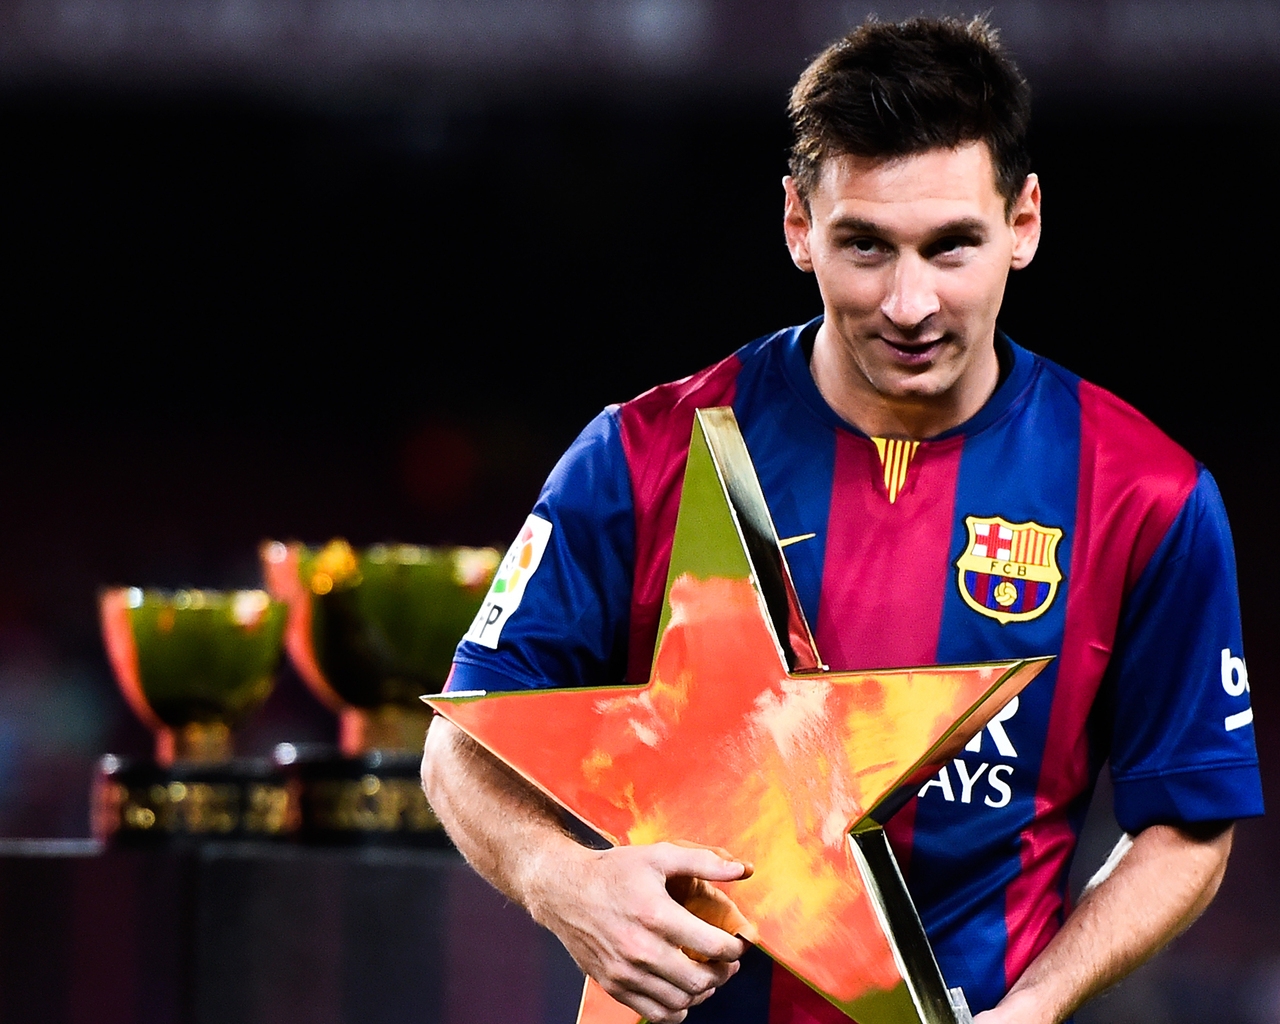 Messi Star Shaped Award for 1280 x 1024 resolution